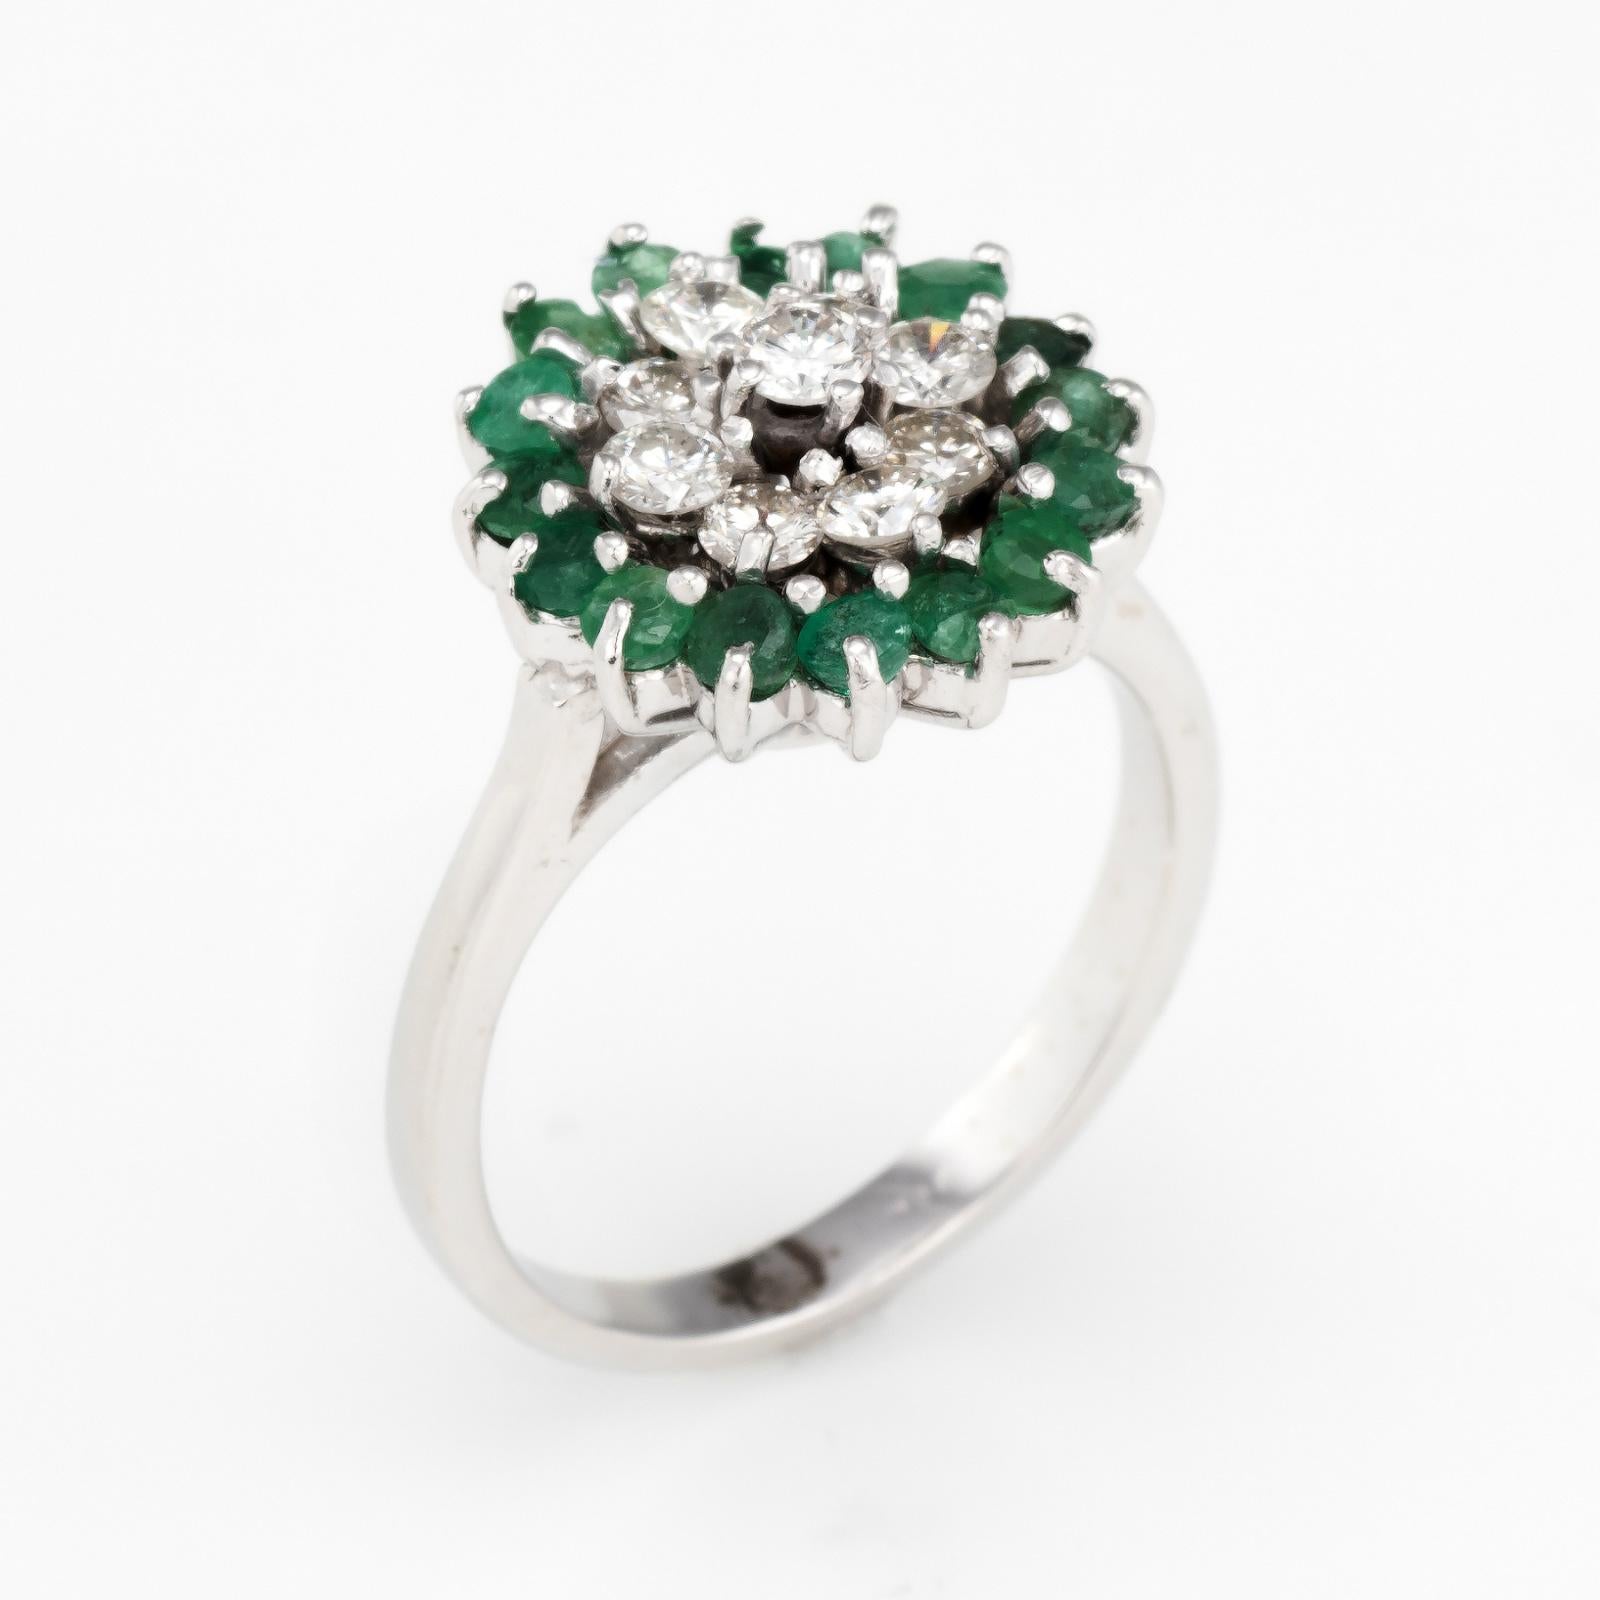 Elegant emerald & diamond cluster ring, crafted in 14 karat white gold (circa 1980s). 

Emeralds total an estimated 0.80 carats, accented with an estimated 0.42 carats of diamonds (estimated at H-I color and VS2-SI2 clarity).

The cluster design